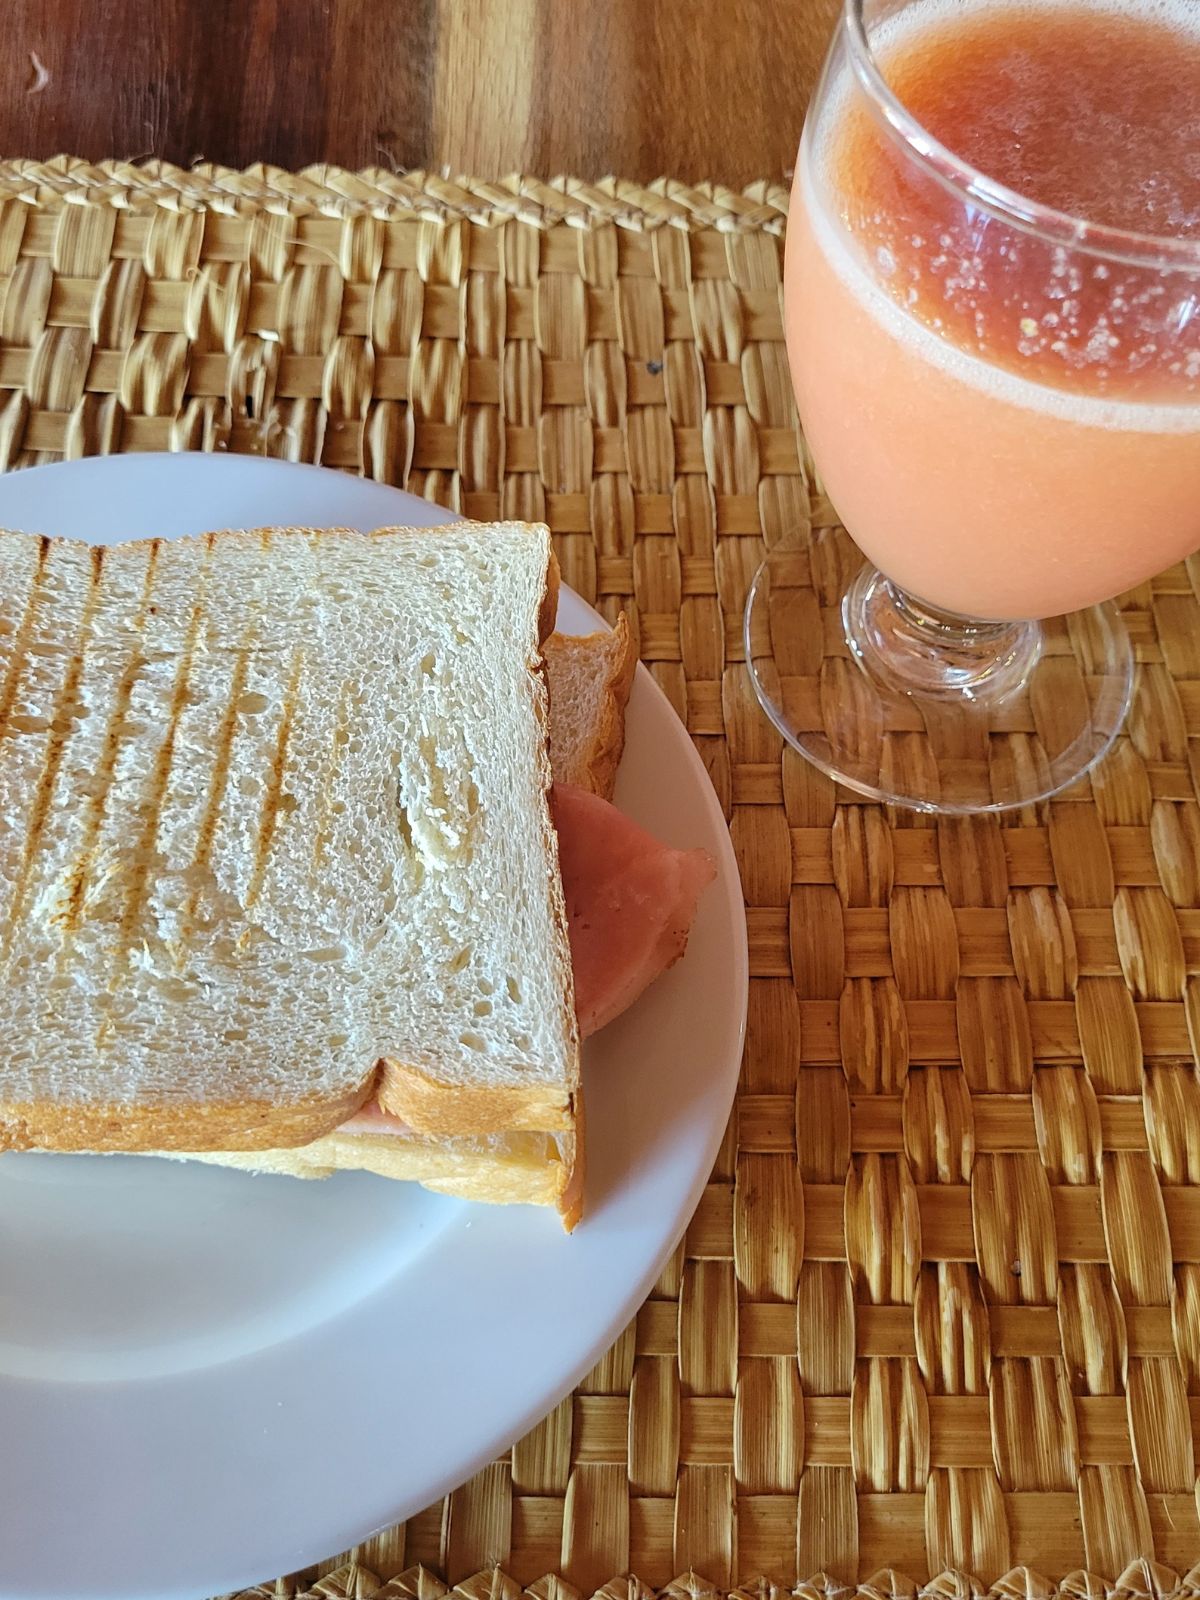 A ham and cheese sandwich on a plate and a fruit smoothie in a glass.